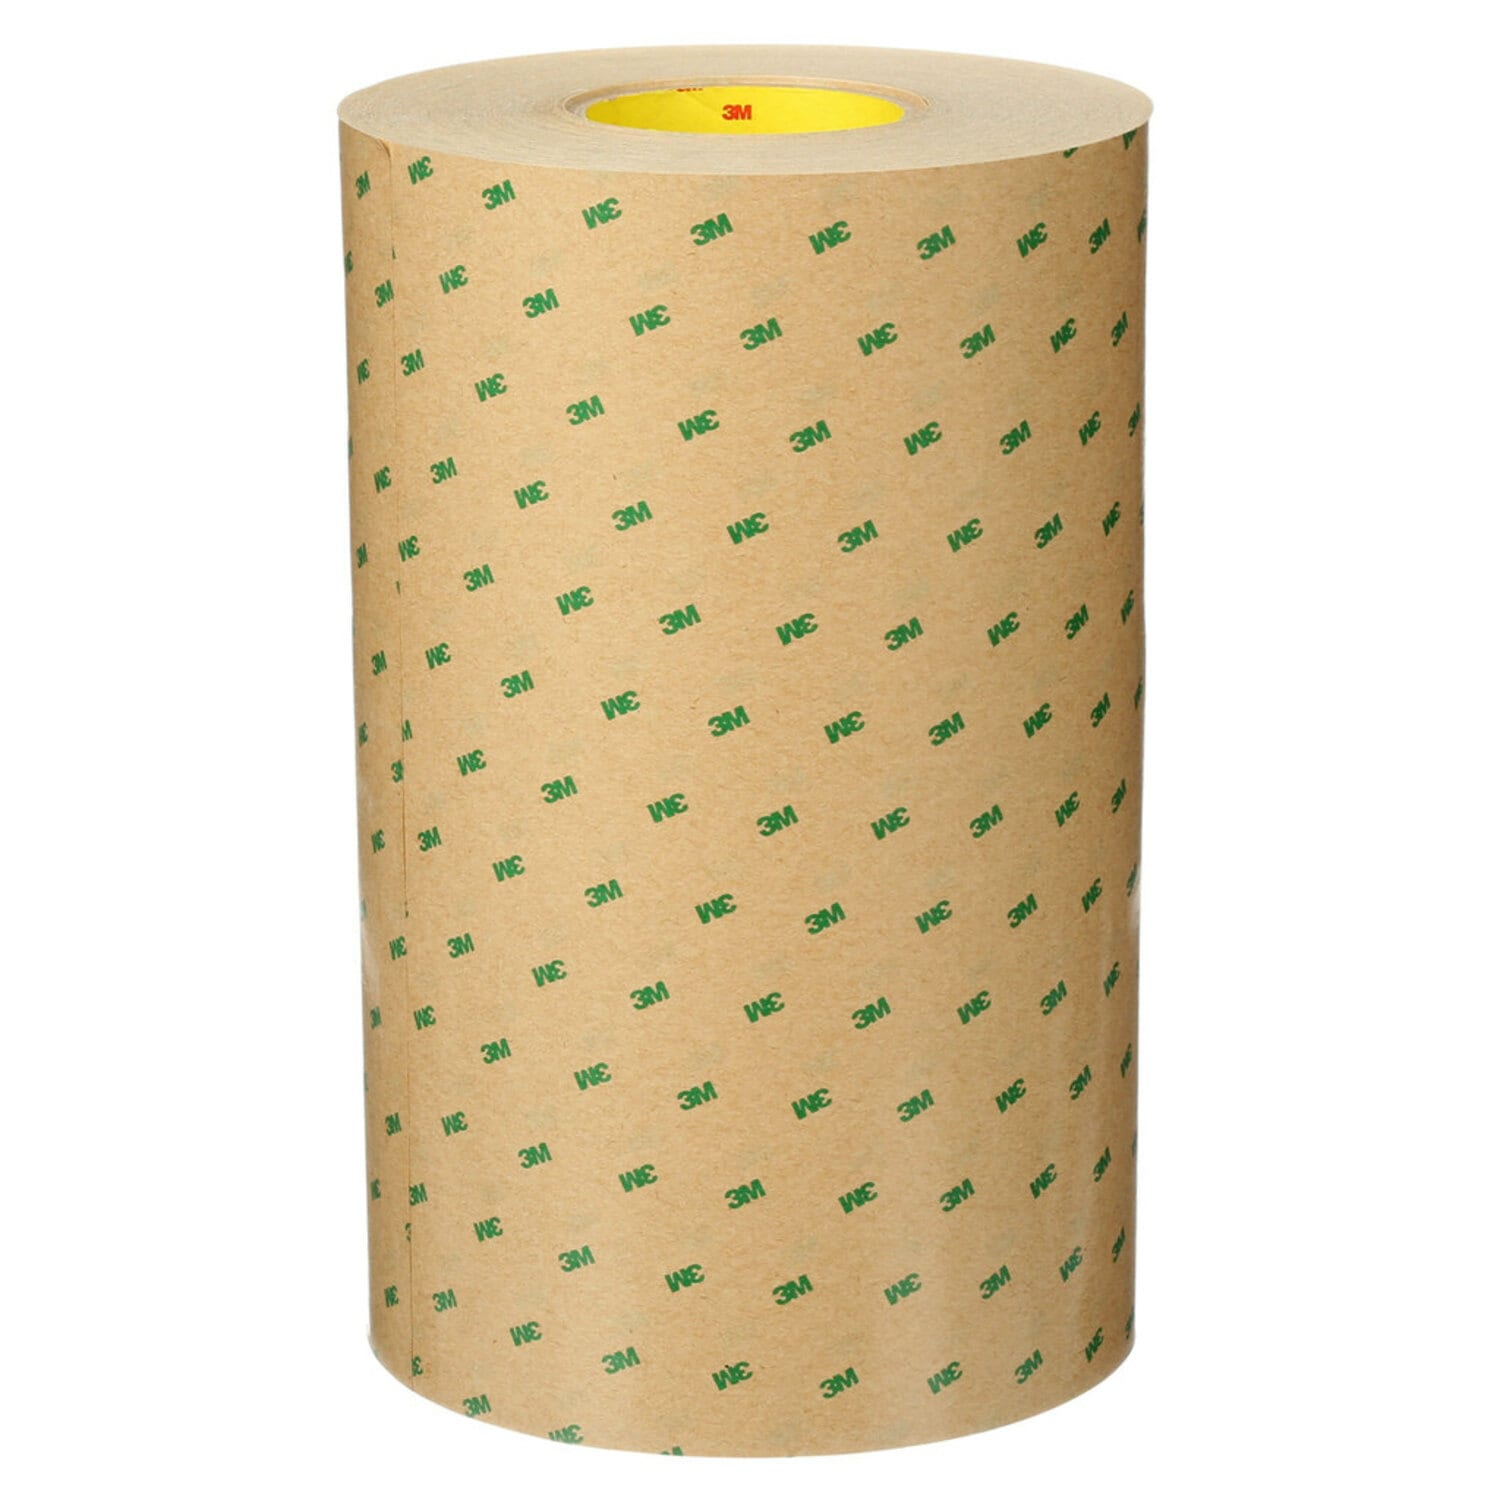 7000123326 - 3M Adhesive Transfer Tape 9472, Clear, 12 in x 180 yd, 5 mil, 1 roll
per case